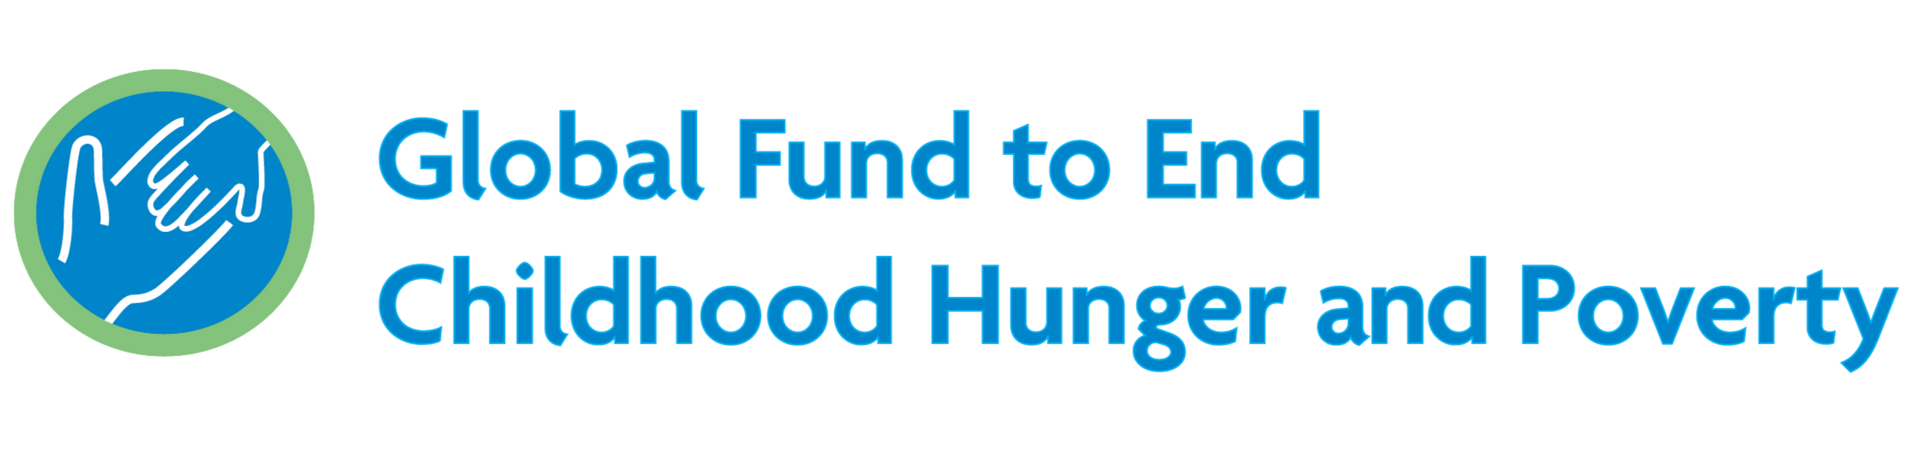 Global Fund to end Childhood Hunger and Poverty